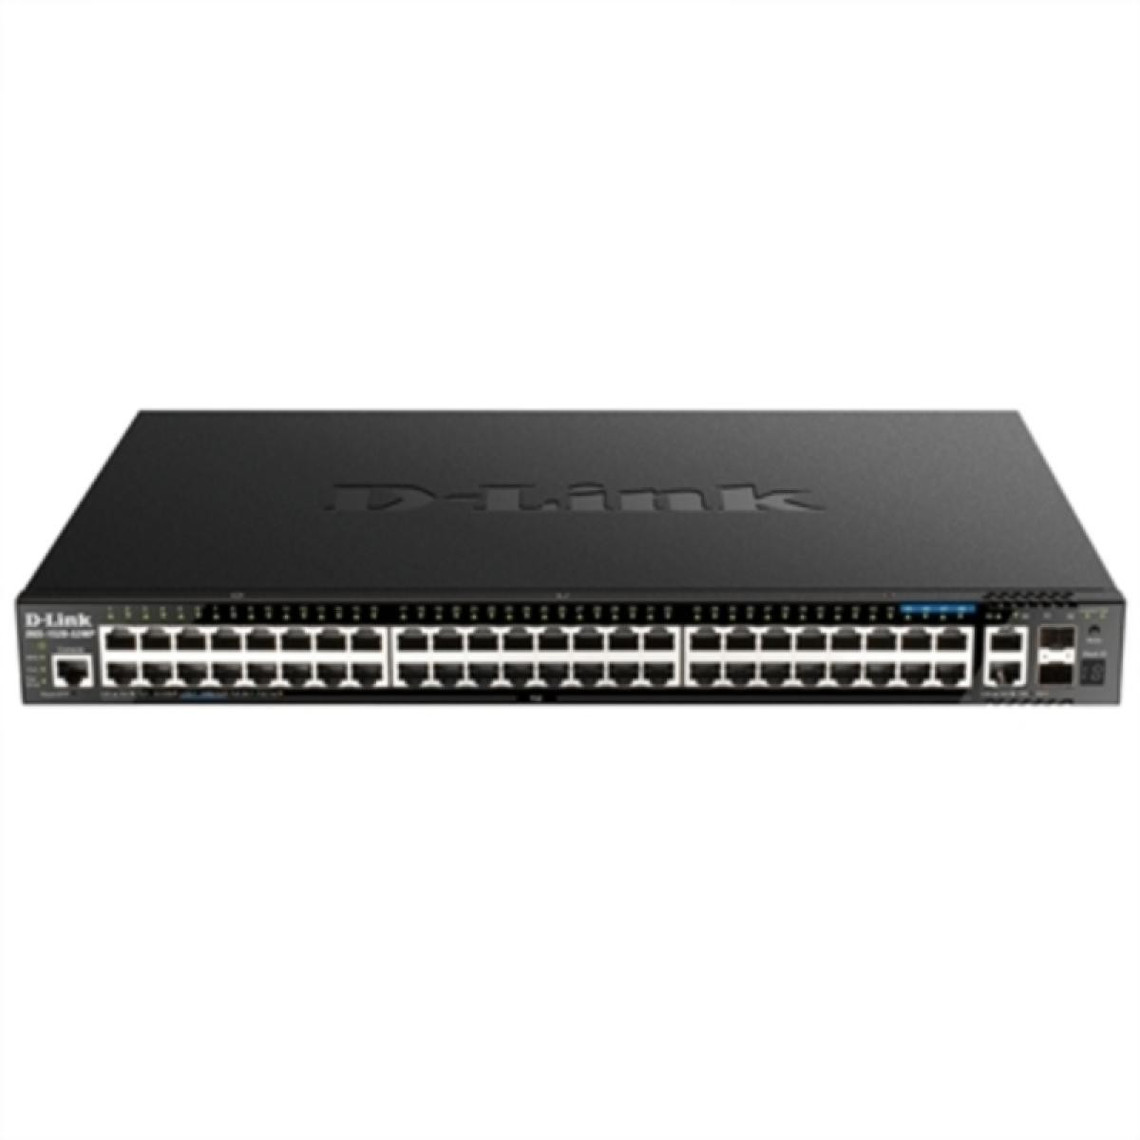 Switch D-Link Switch D-Link DGS-1520-52MP 44xGE 4 x 2.5GBase-T PoE 2 x 10GBase-T 2 x 10G SFP+